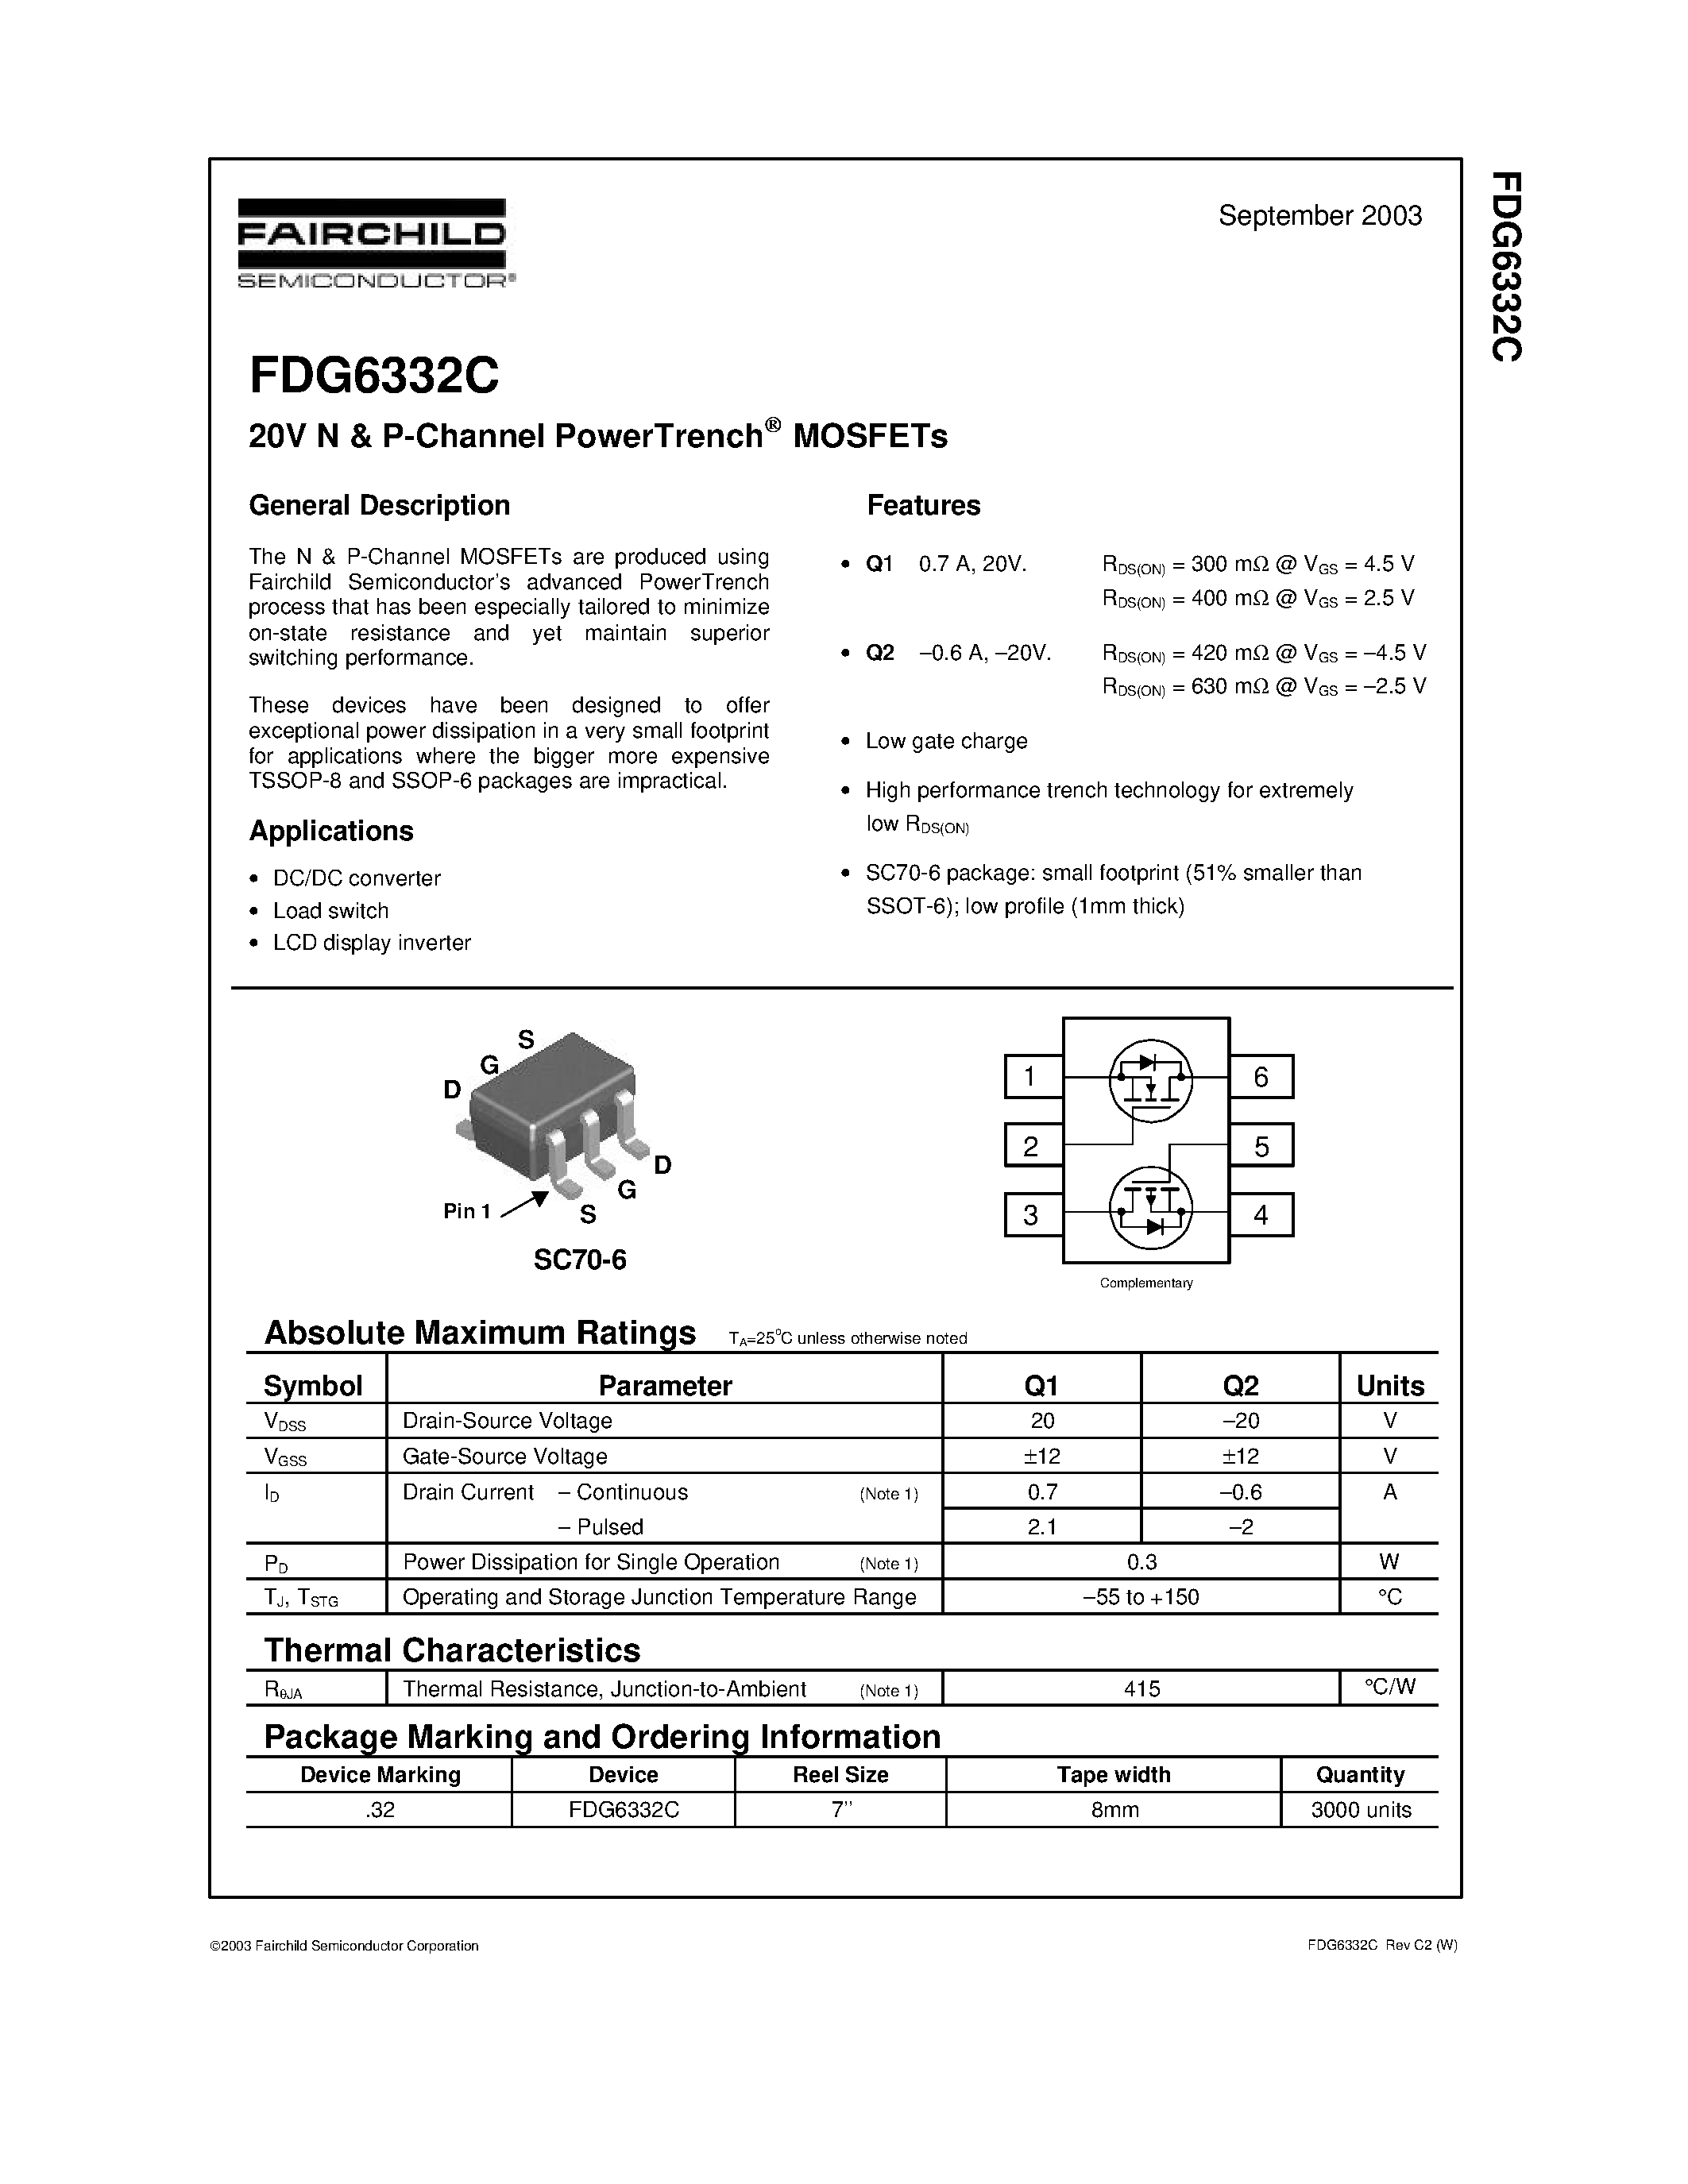 Даташит FDG6332C - 20V N & P-Channel PowerTrench MOSFETs страница 1